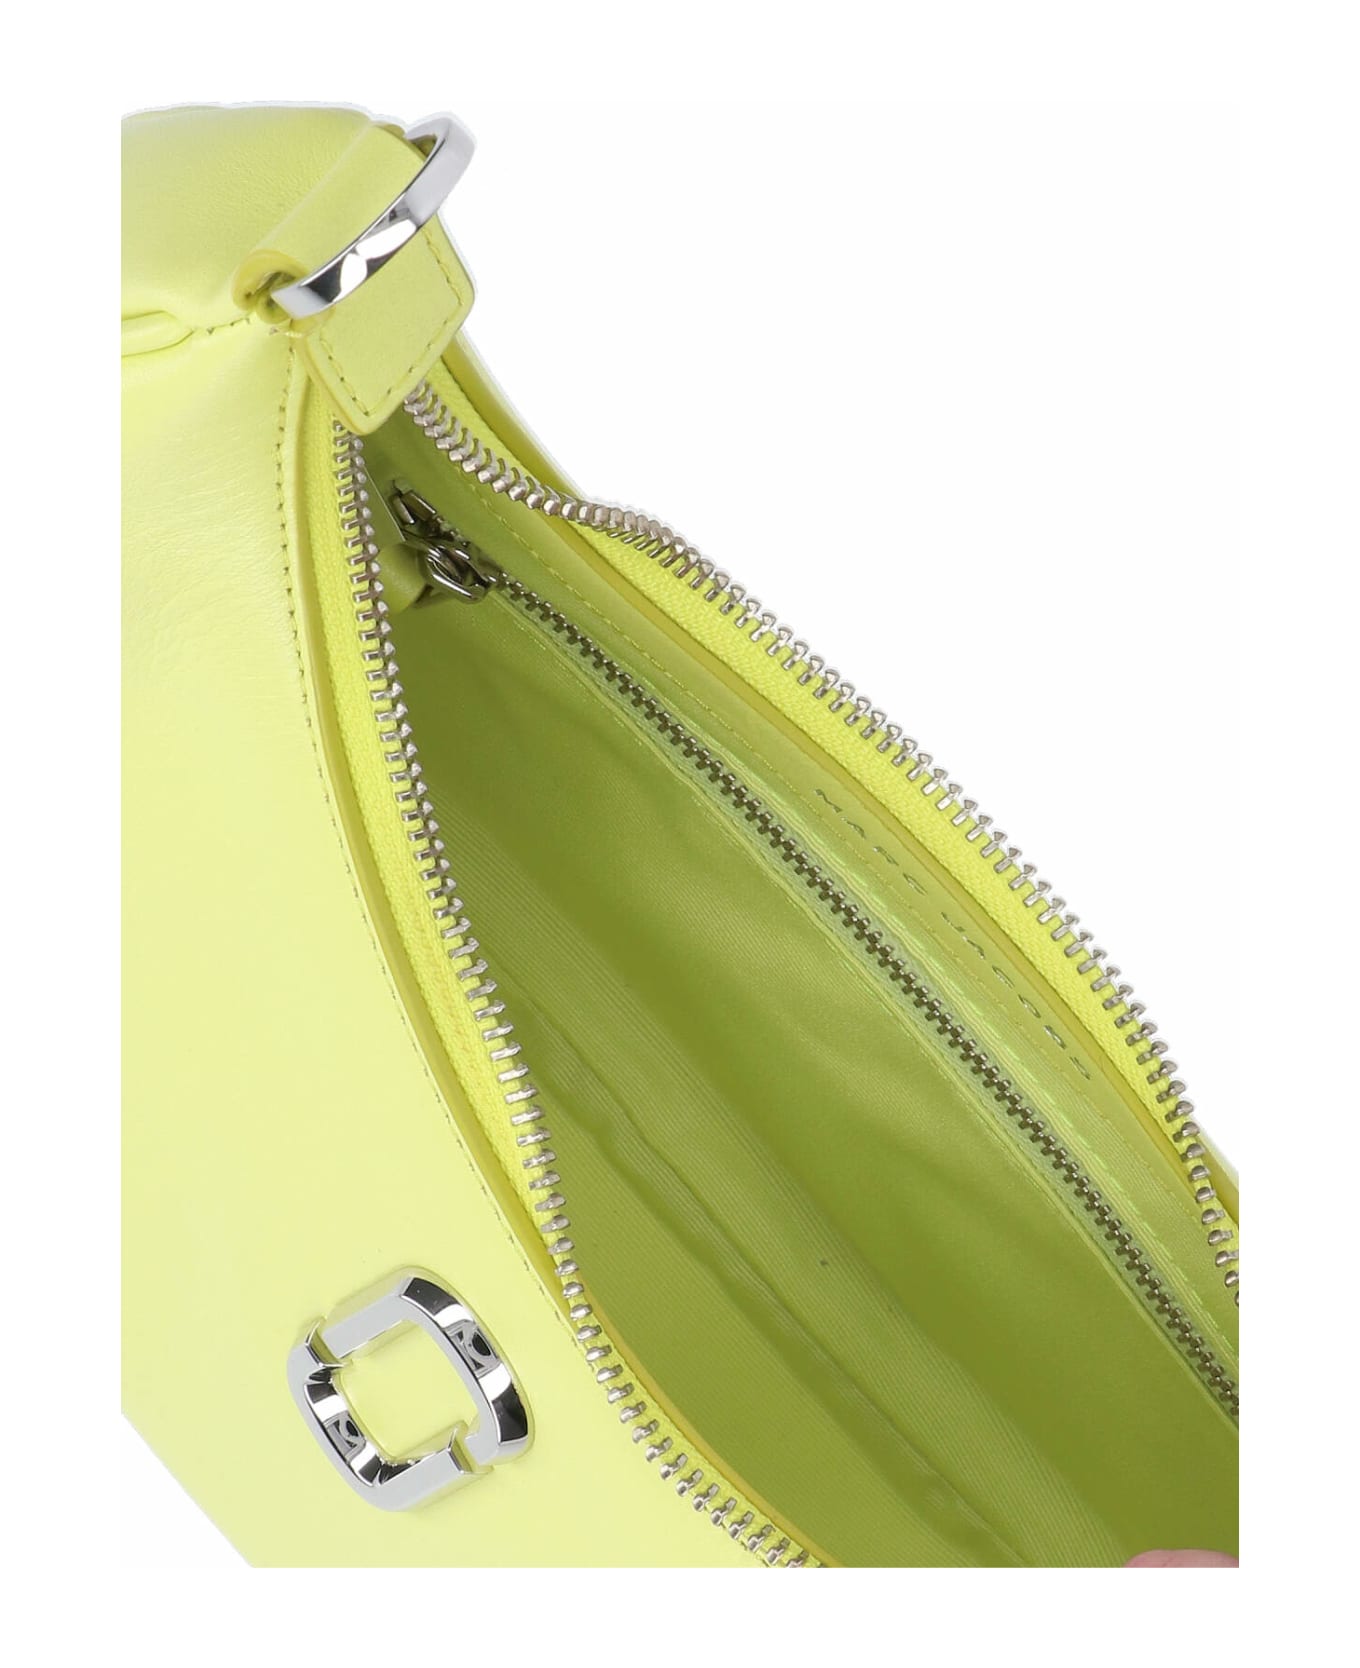 Marc Jacobs The Curve Bag - Yellow トートバッグ